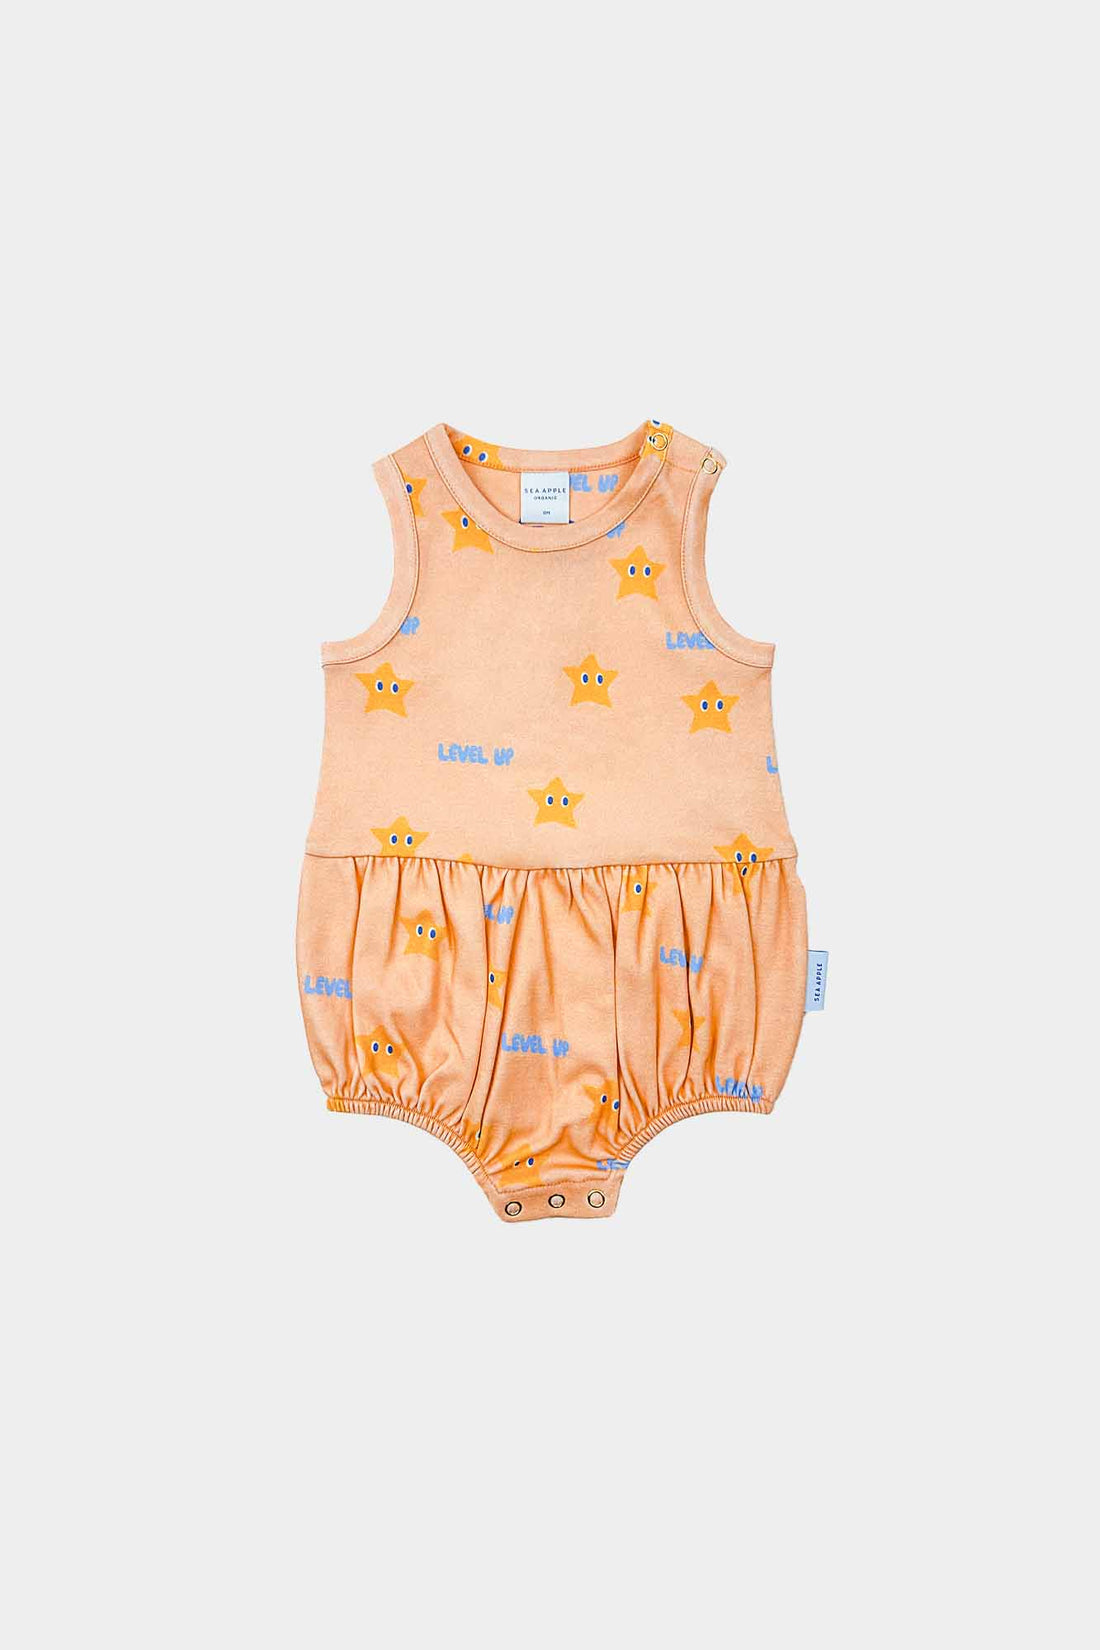 Level up Bloomers Playsuit